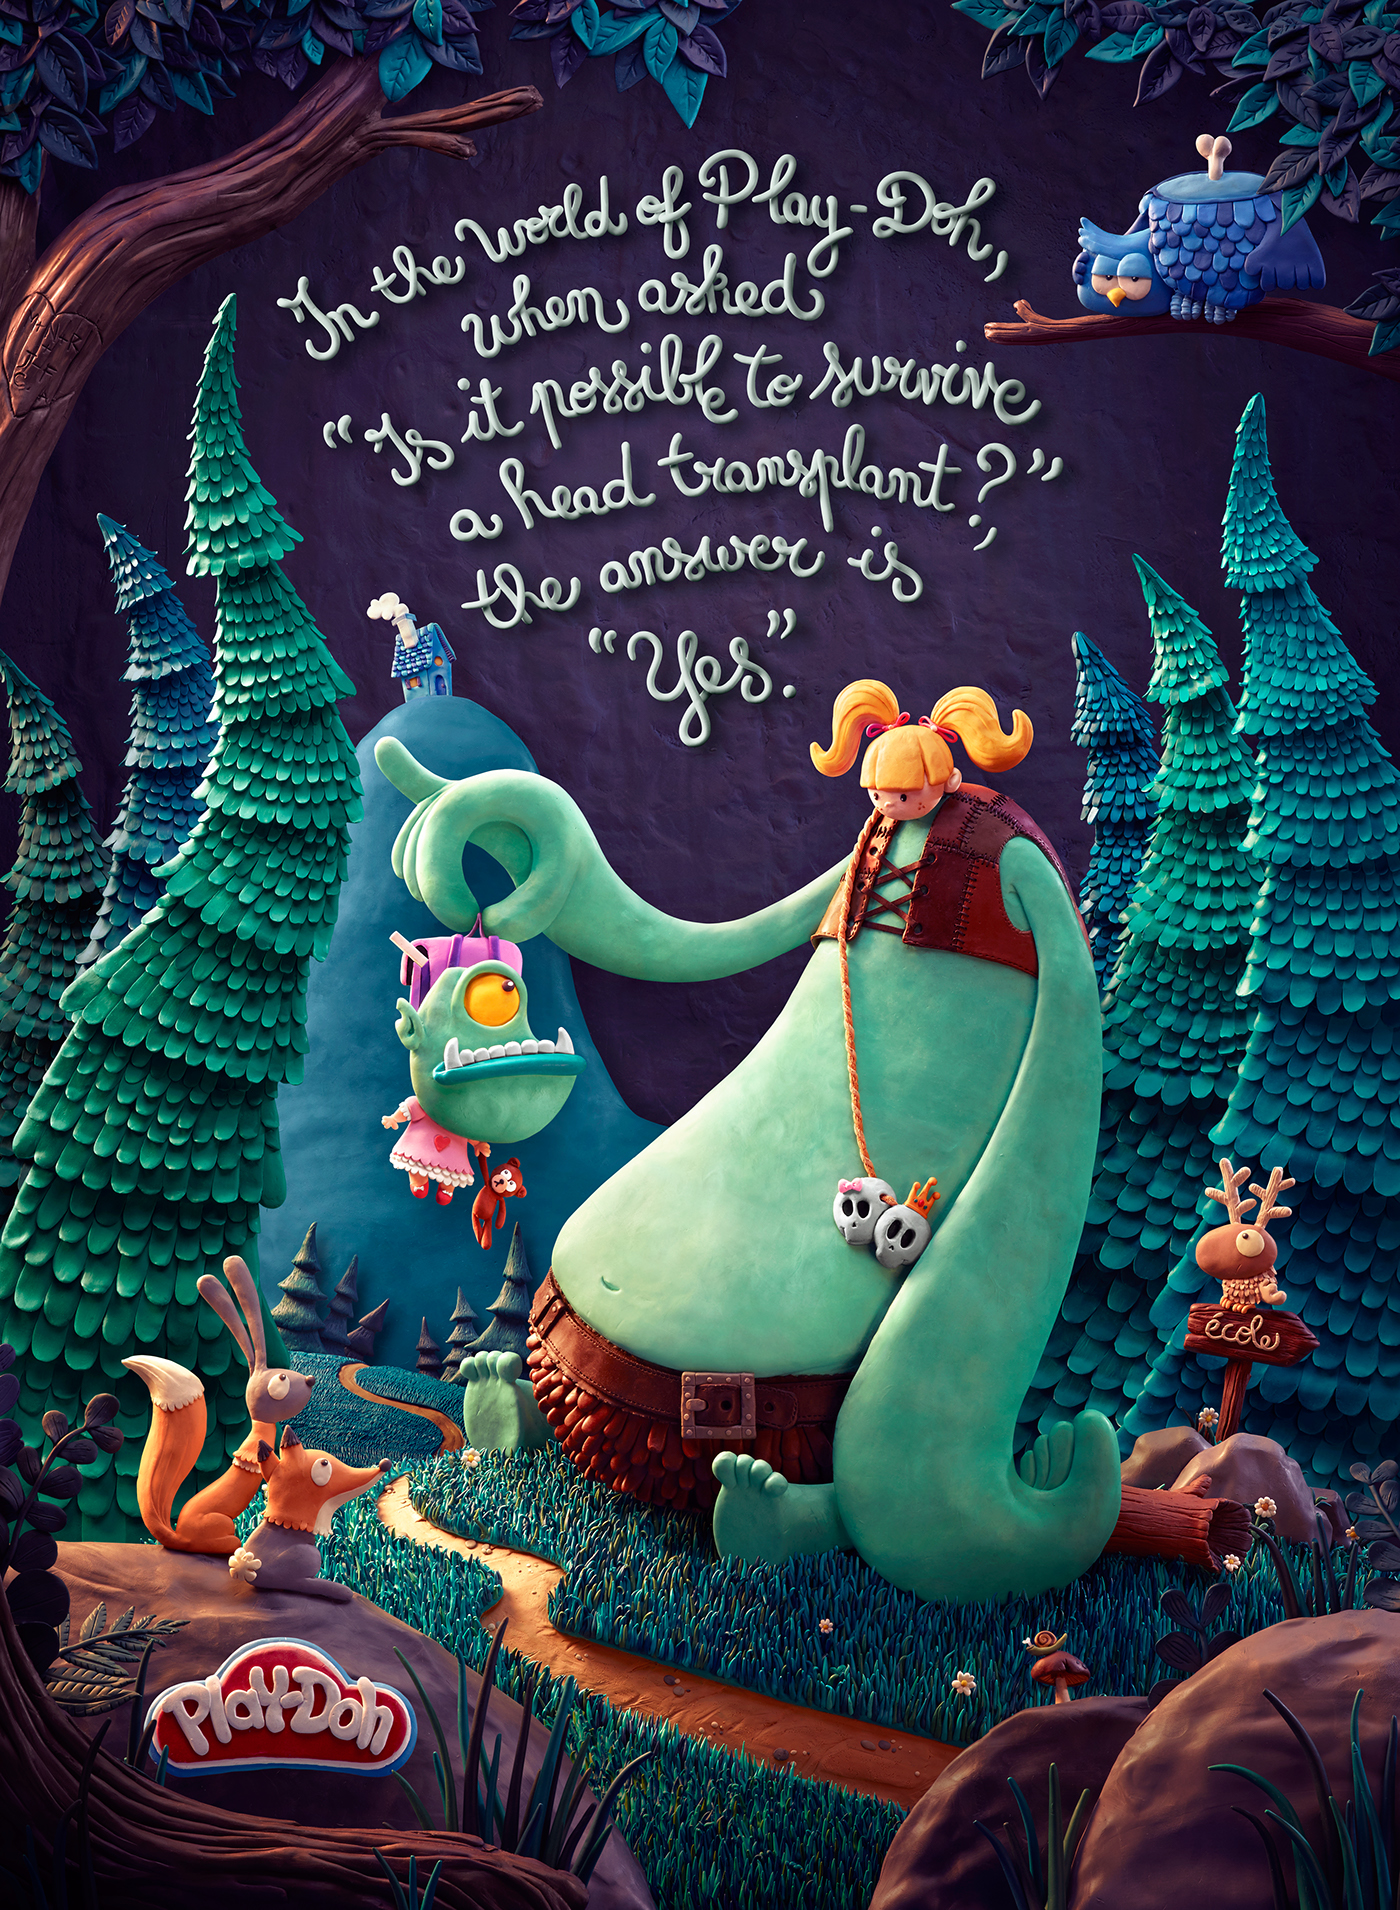 IN THE WORLD OF PLAY DOH on Behance